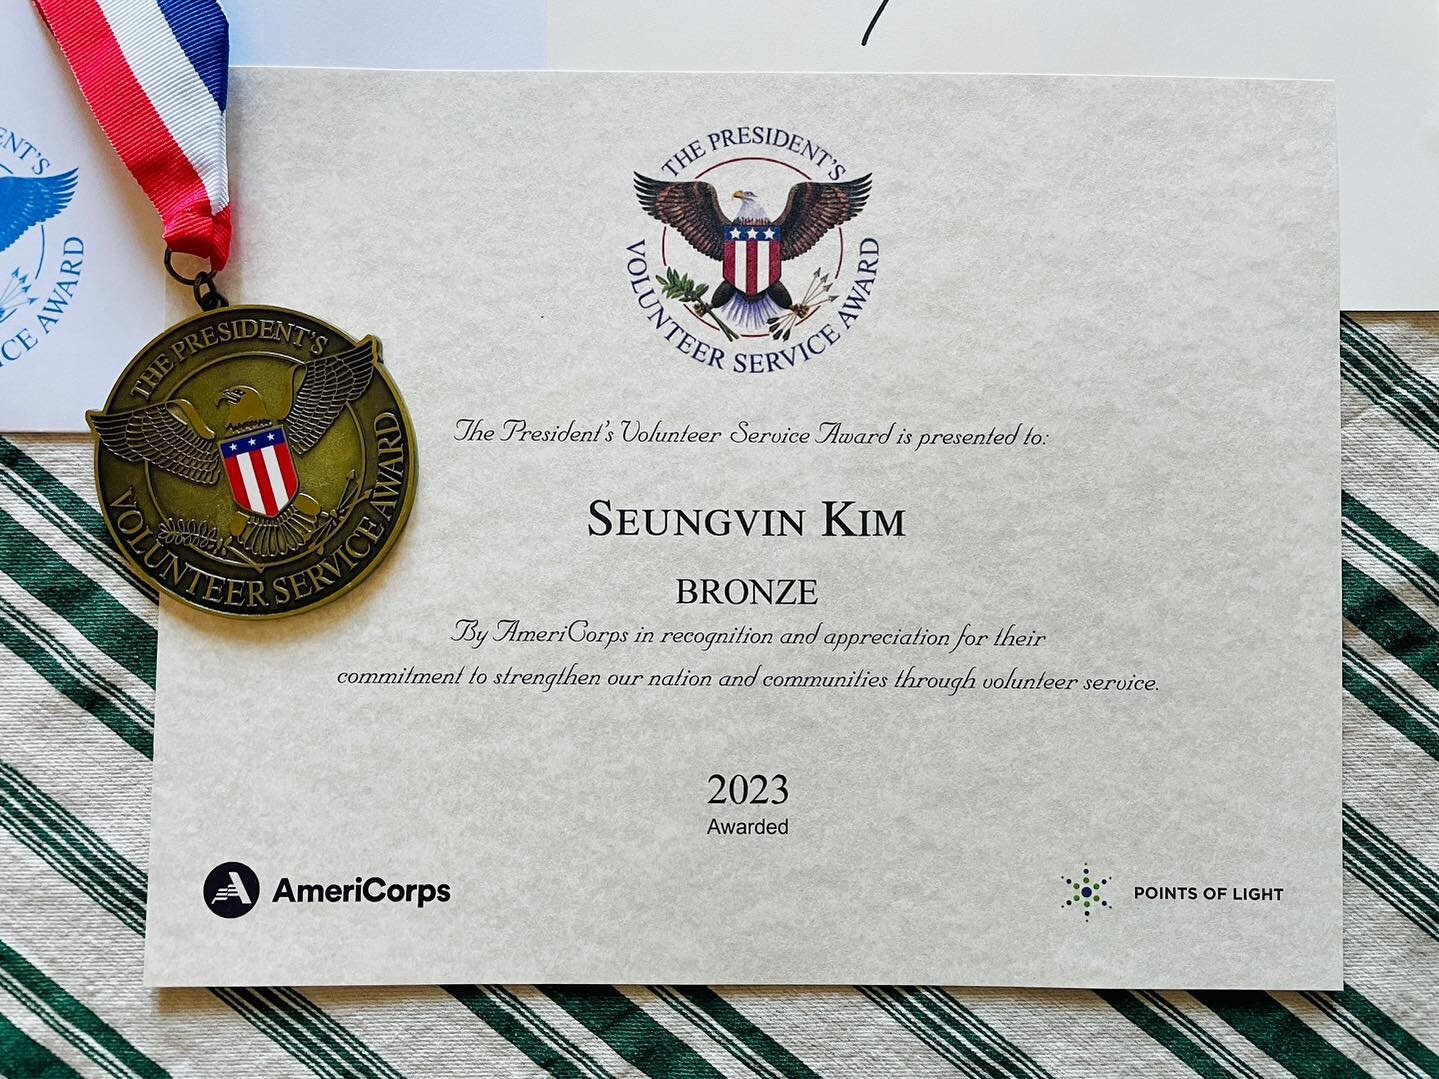 We are a certified organization for recognizing outstanding volunteers 🤩
Congrats Seungvin for getting recognized and appreciated by The President&rsquo;s Volunteer Service!

#certified #presidentsvolunteerserviceaward #volunteer #award #middleschoo